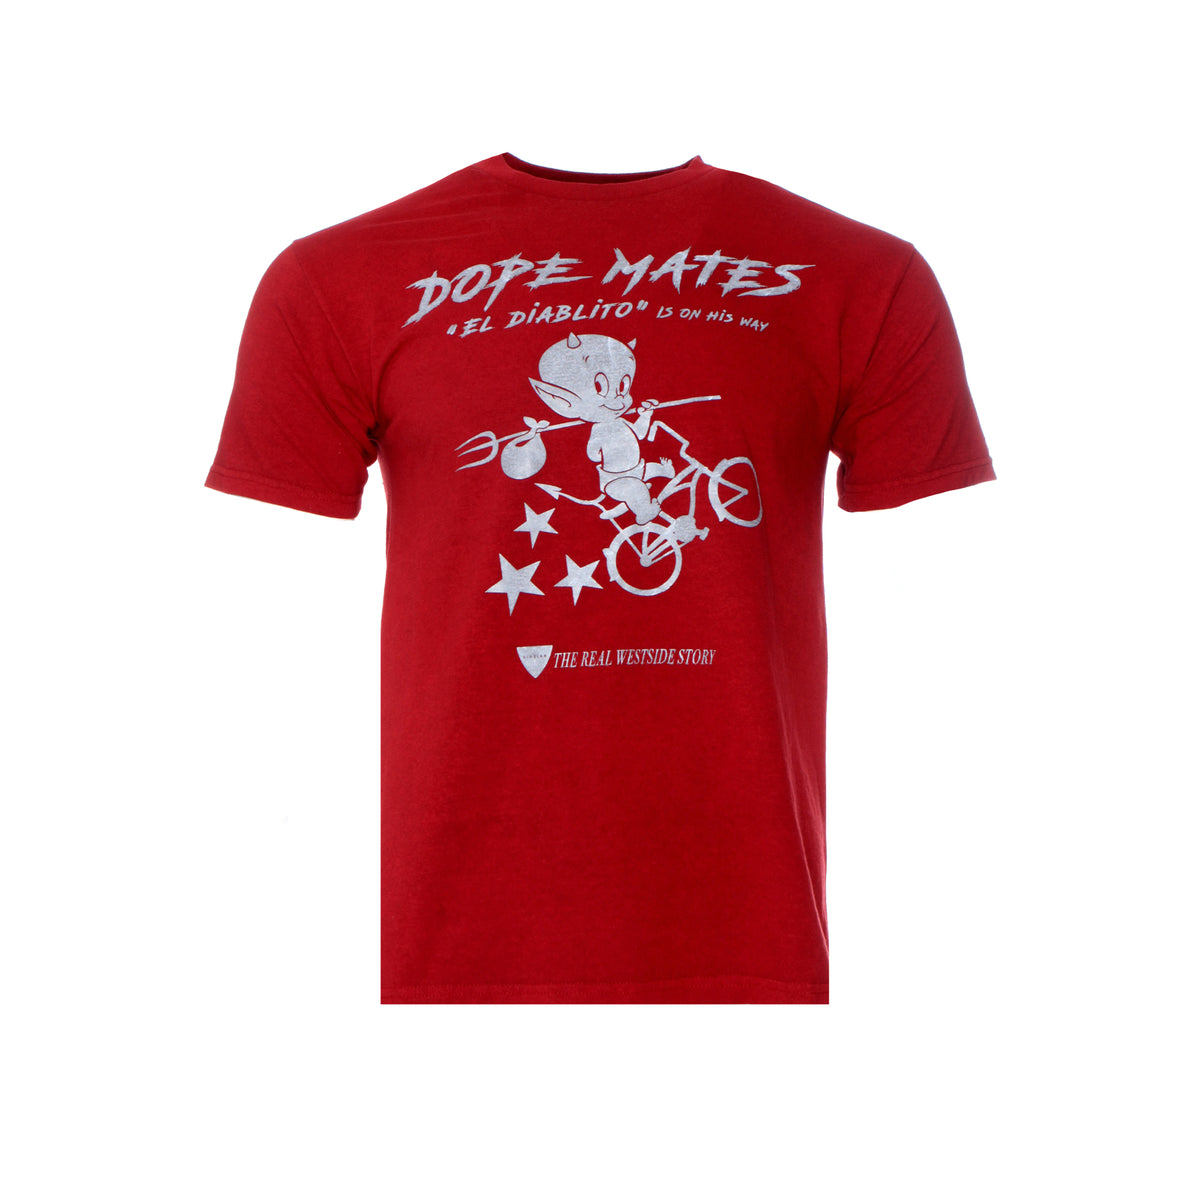 Sixelar Dope Mates Men's SS Graphic Tee Red